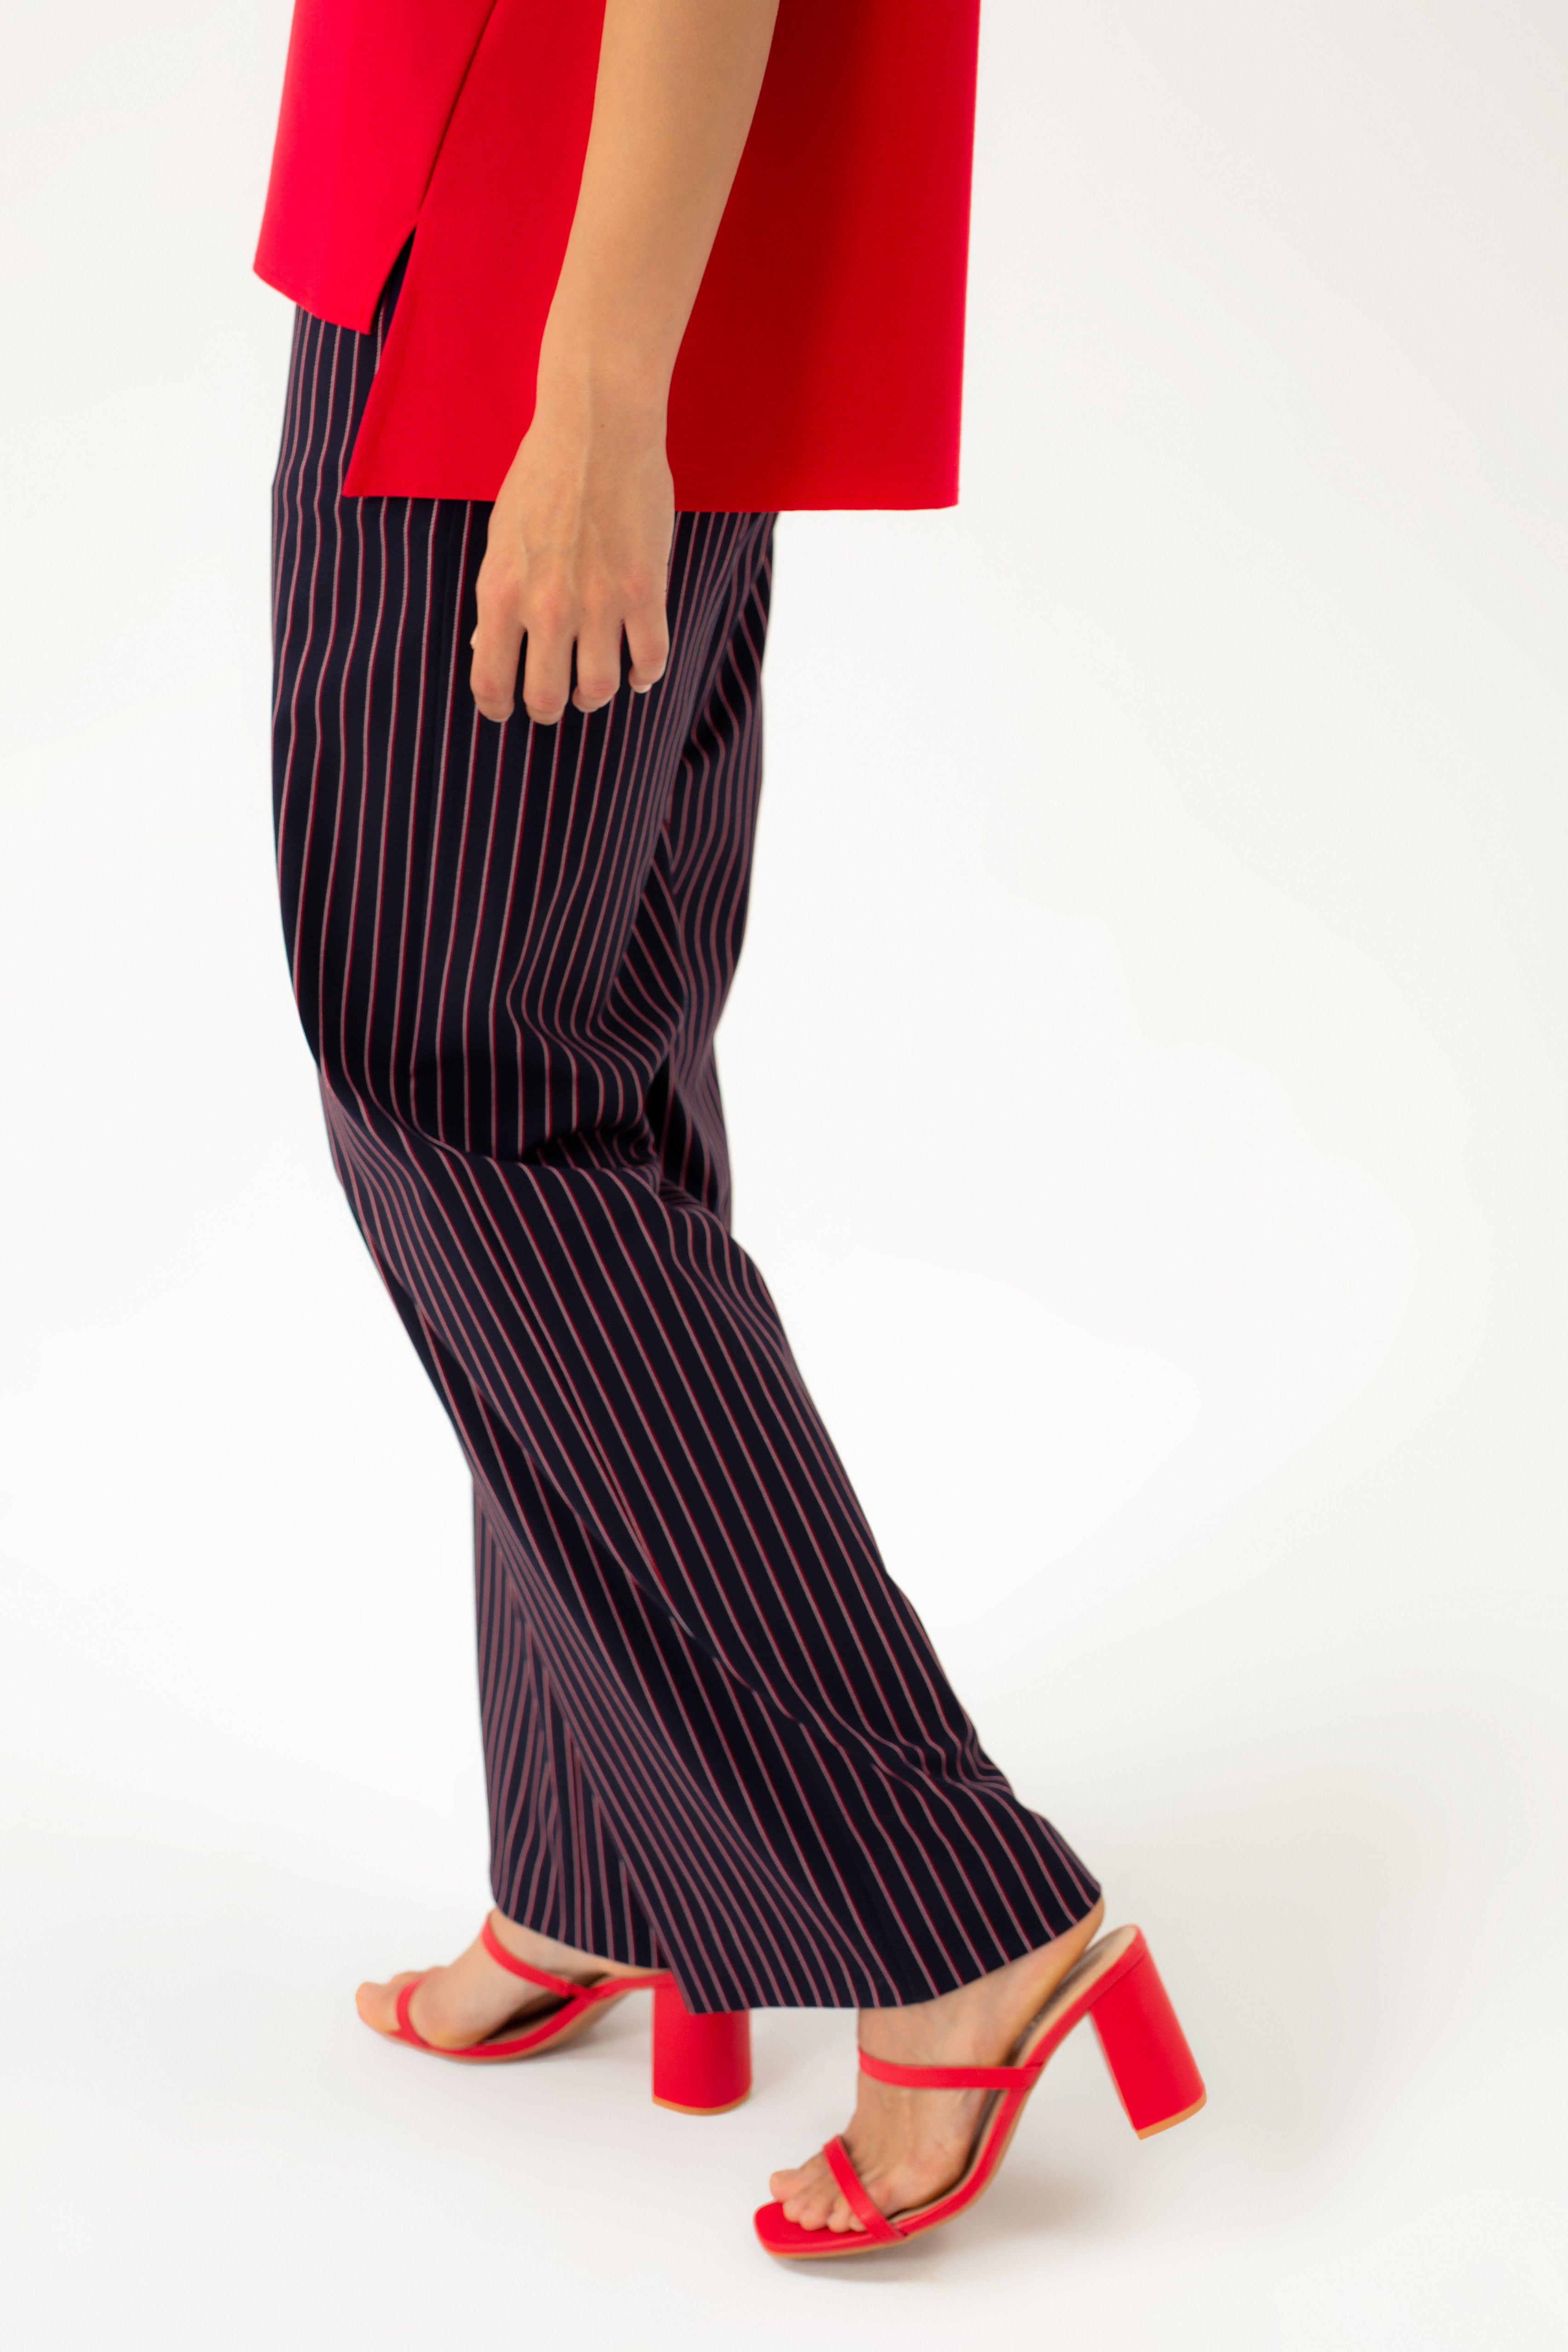 STRAIGTH NAVY TROUSERS WITH RED STRIPES